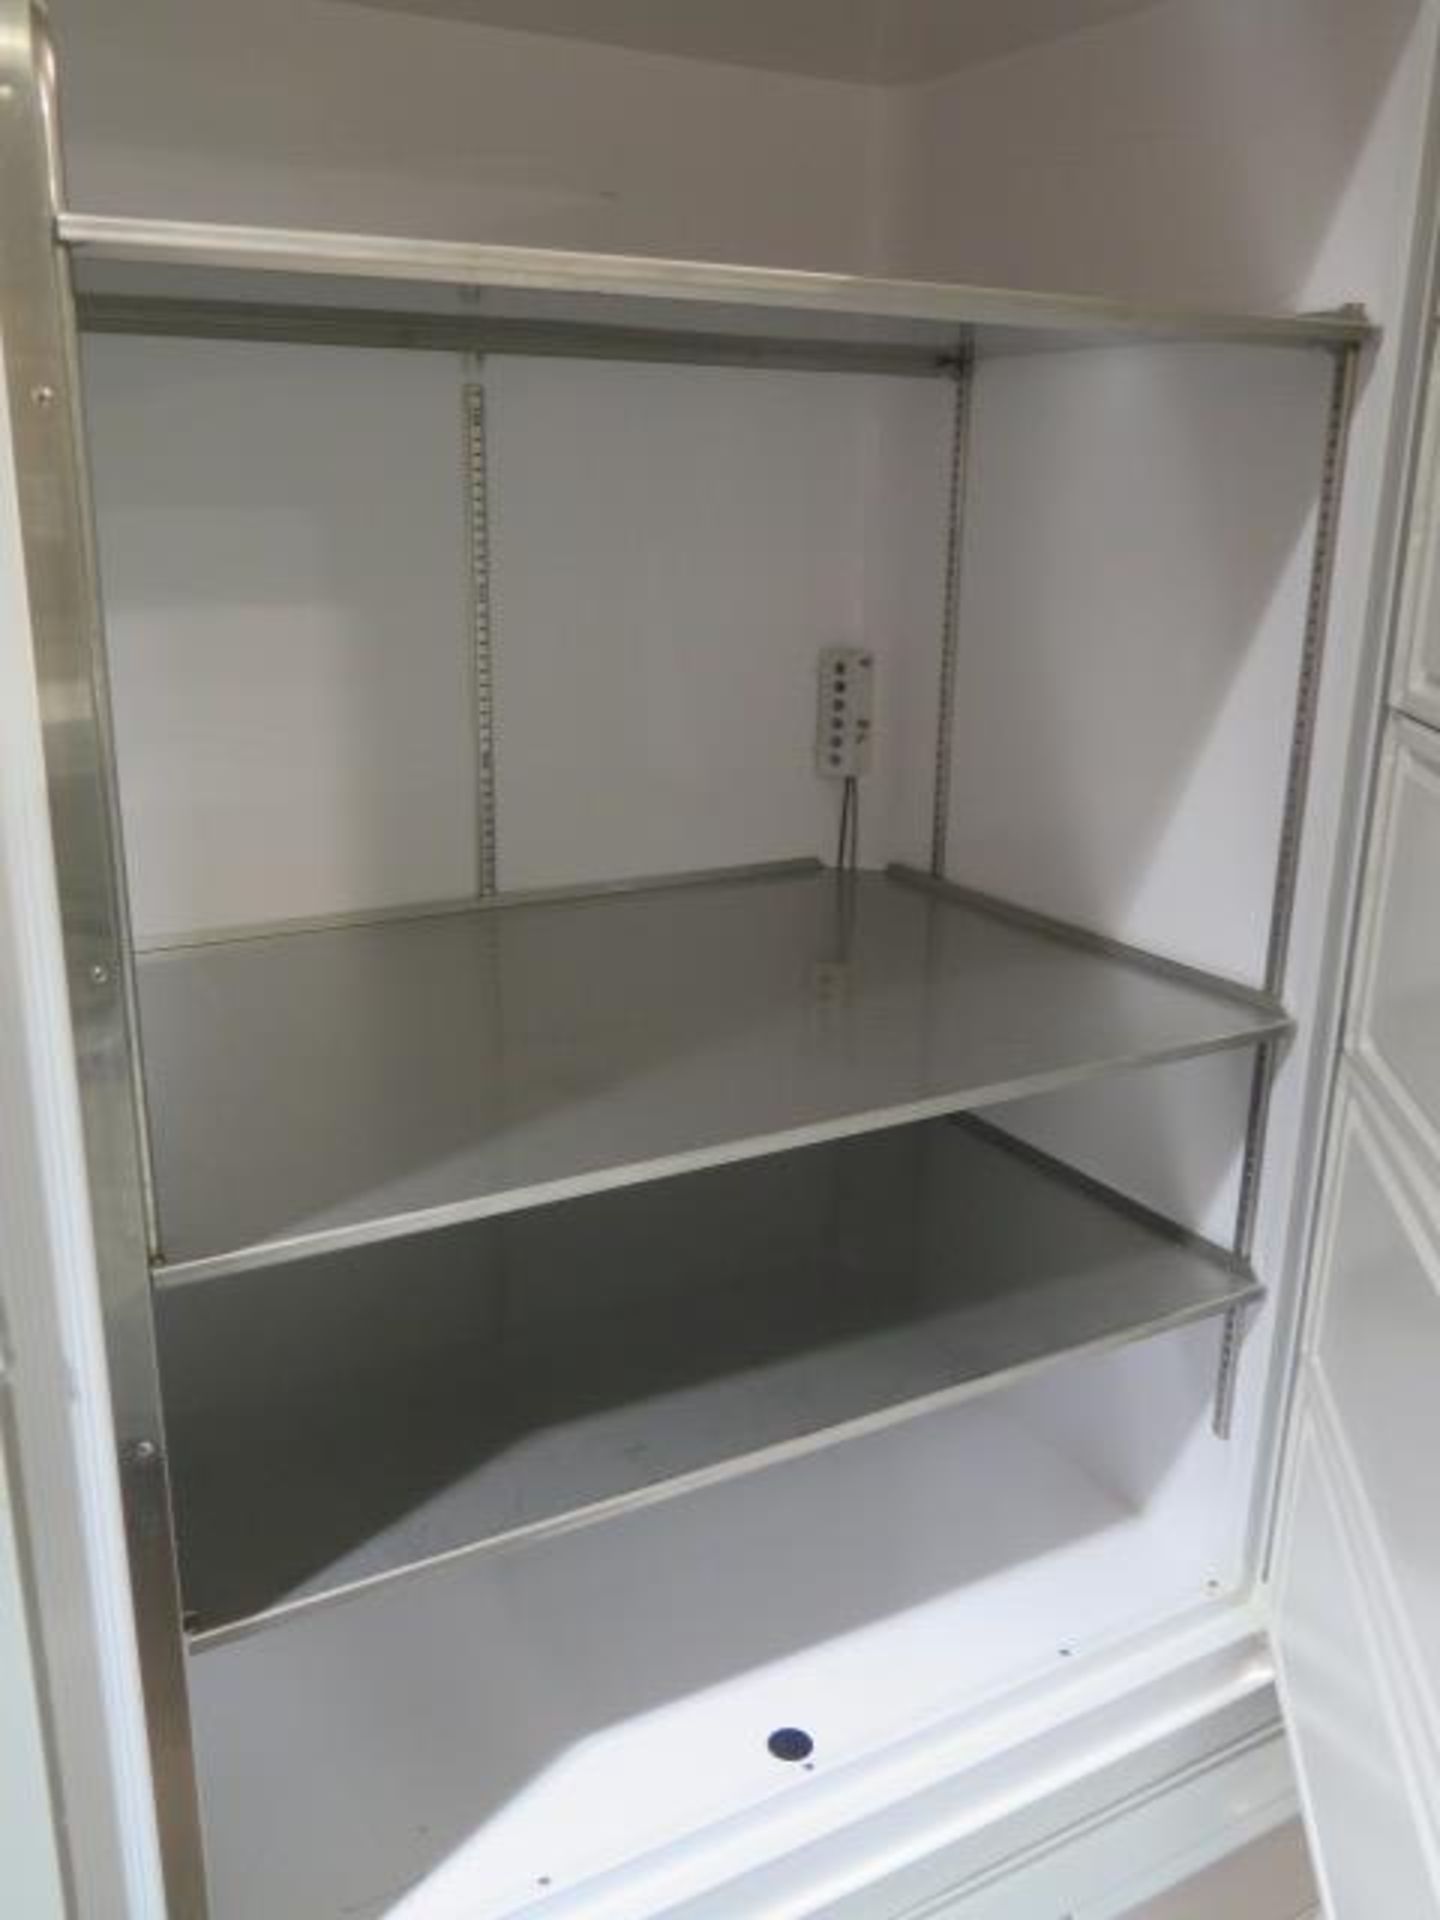 Revco ULT2586-9-A34 -80 Degree Lab Freezer (SOLD AS-IS - NO WARRANTY) - Image 6 of 9